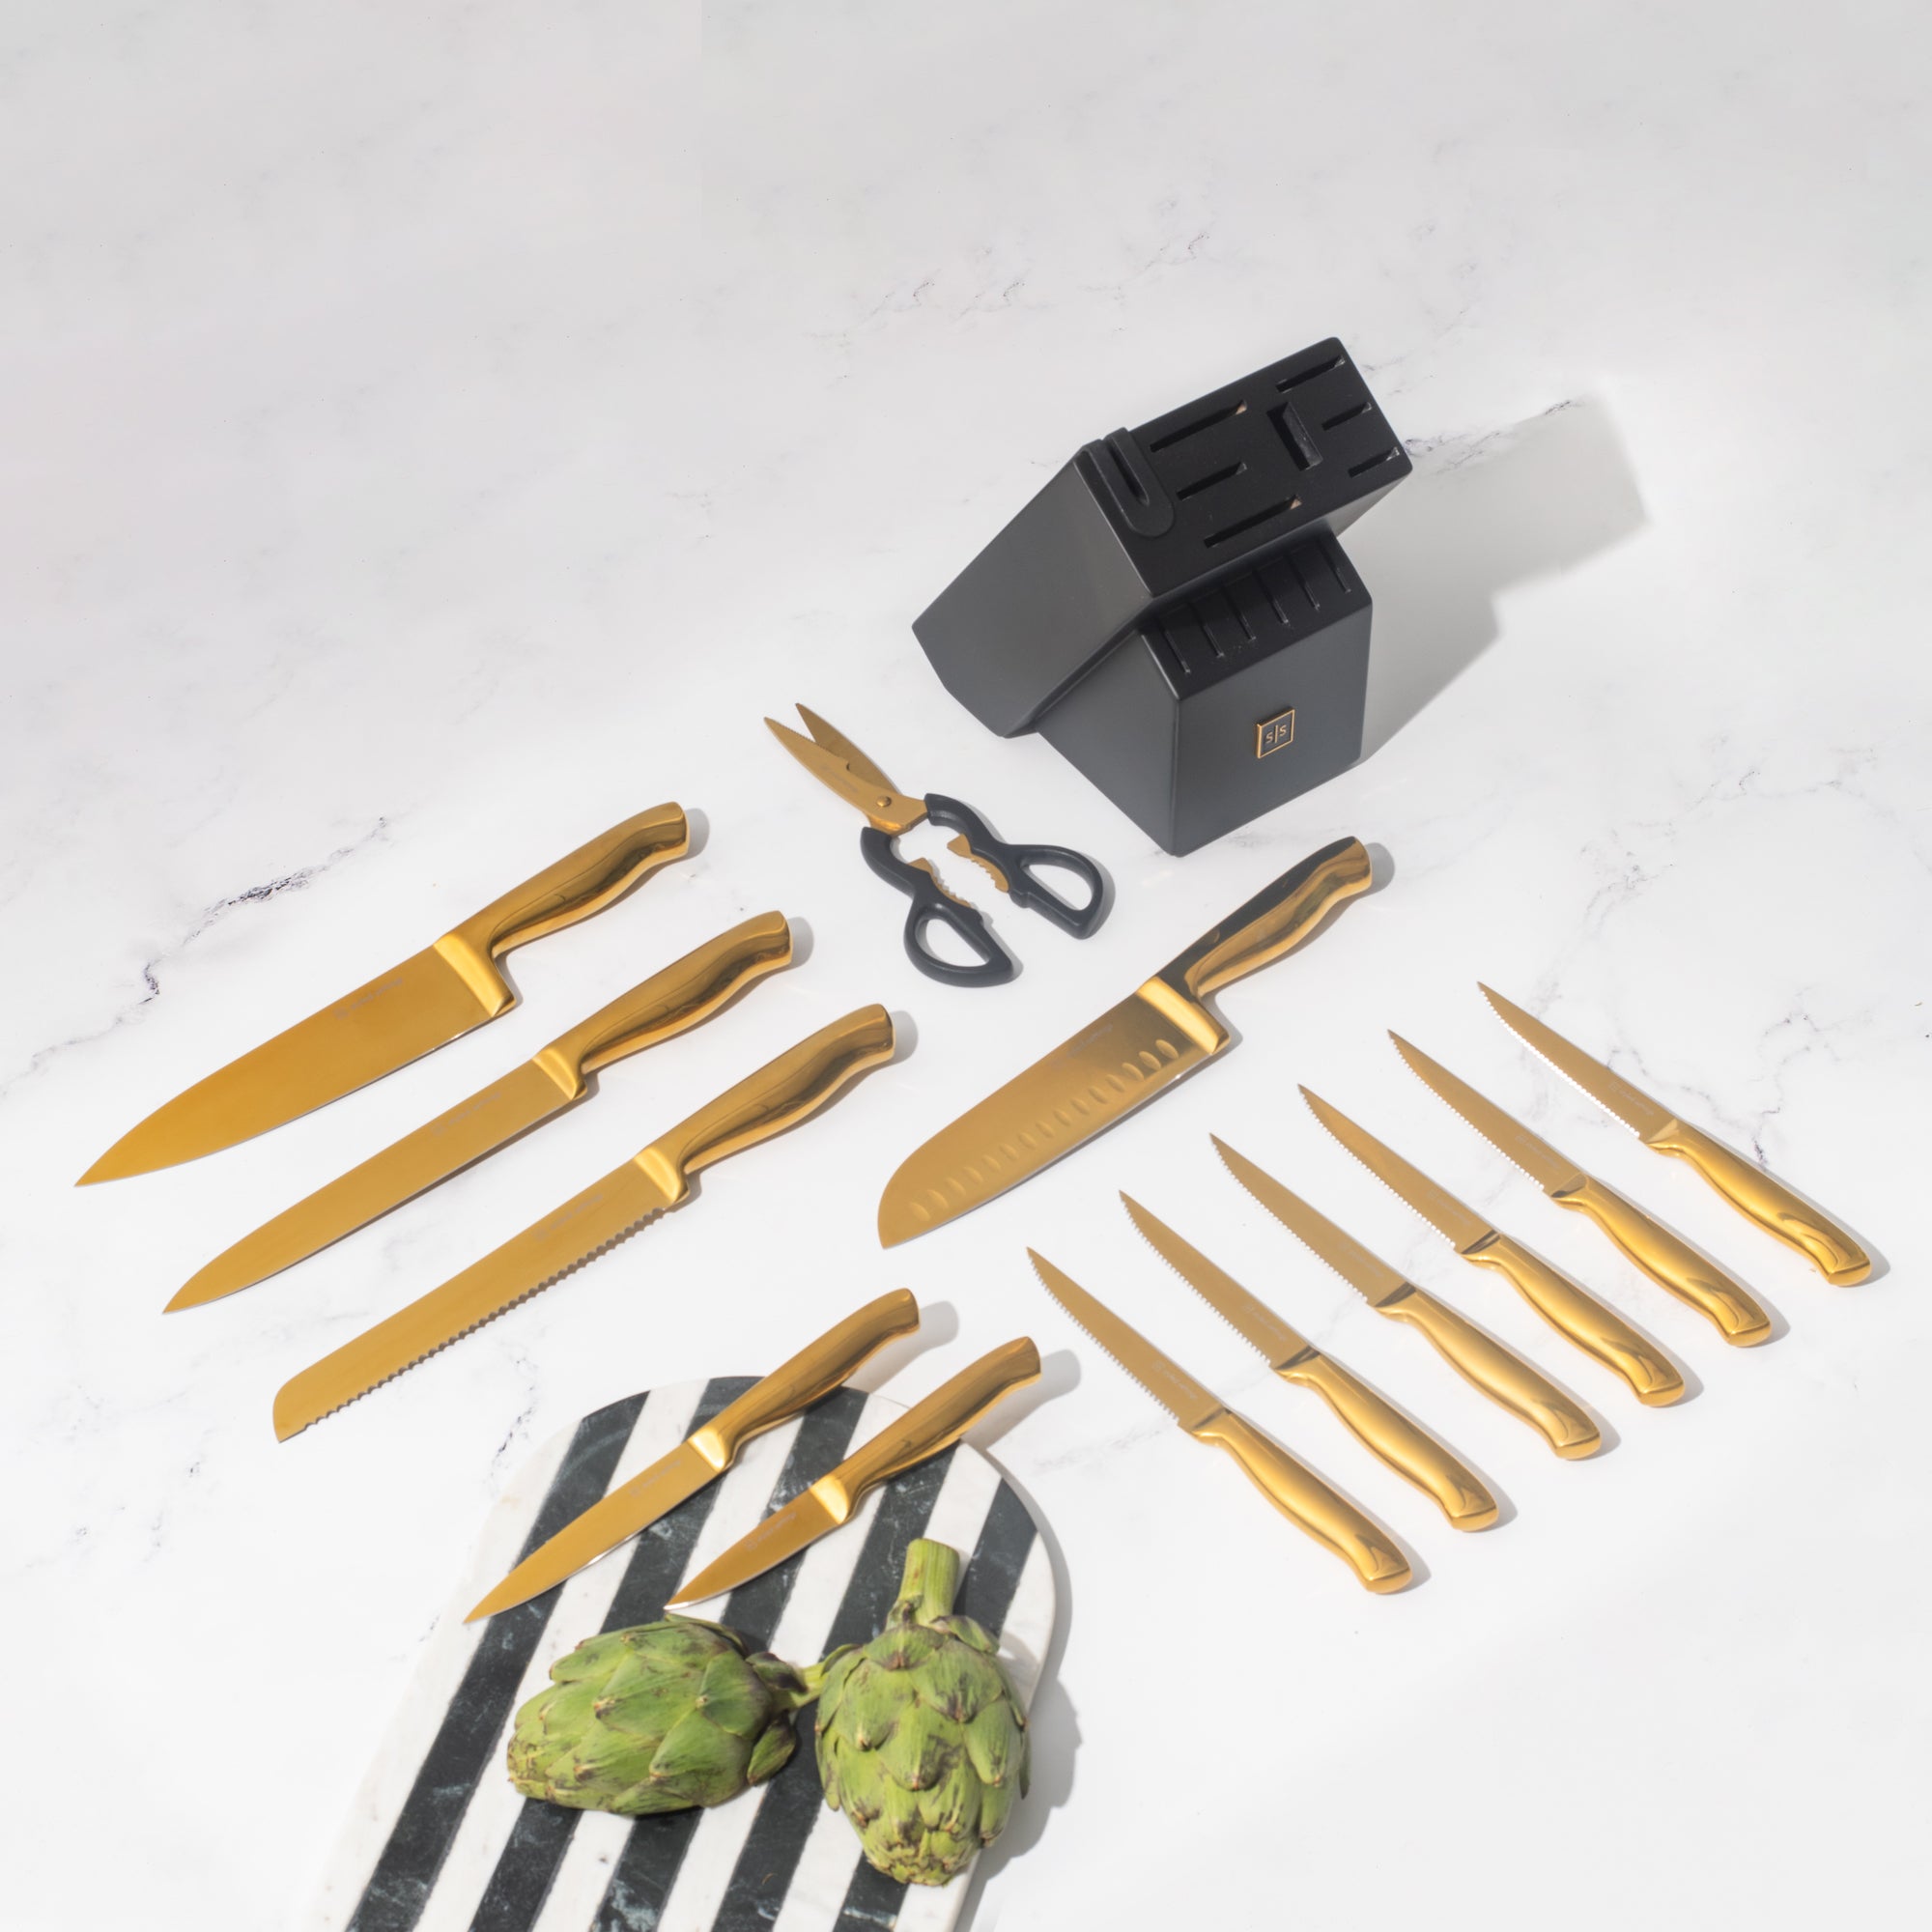  Black and Gold Knife Set with Block - 14 Piece Gold